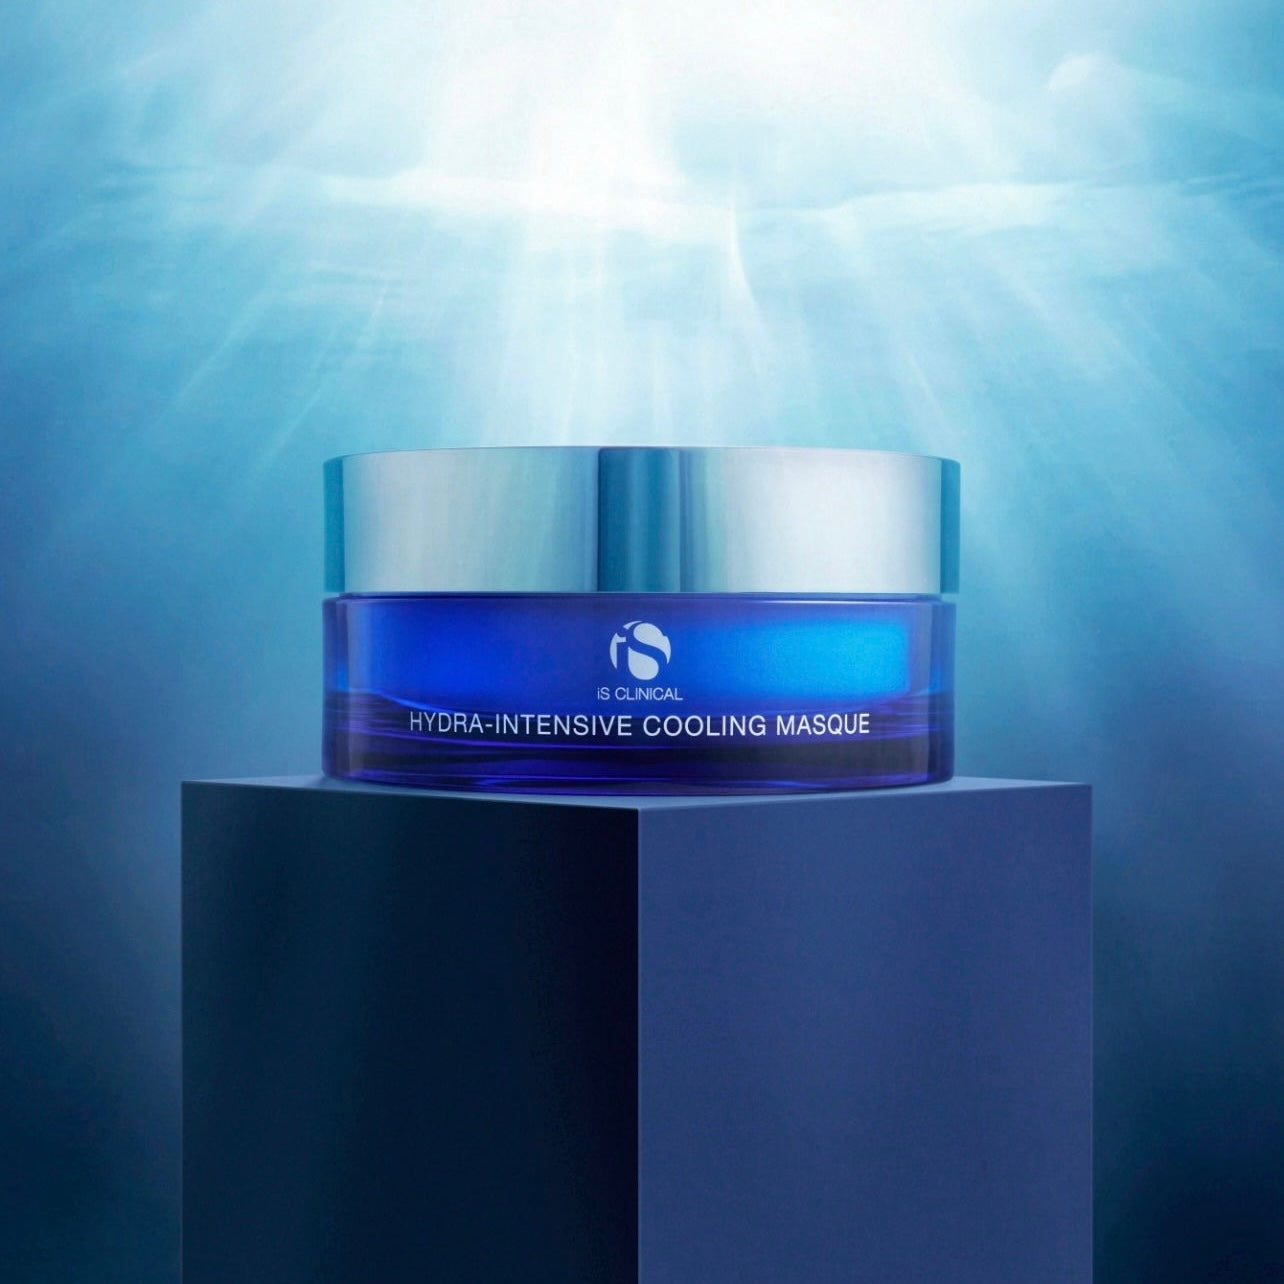 iS Clinical Hydra-Intensive Cooling Masque